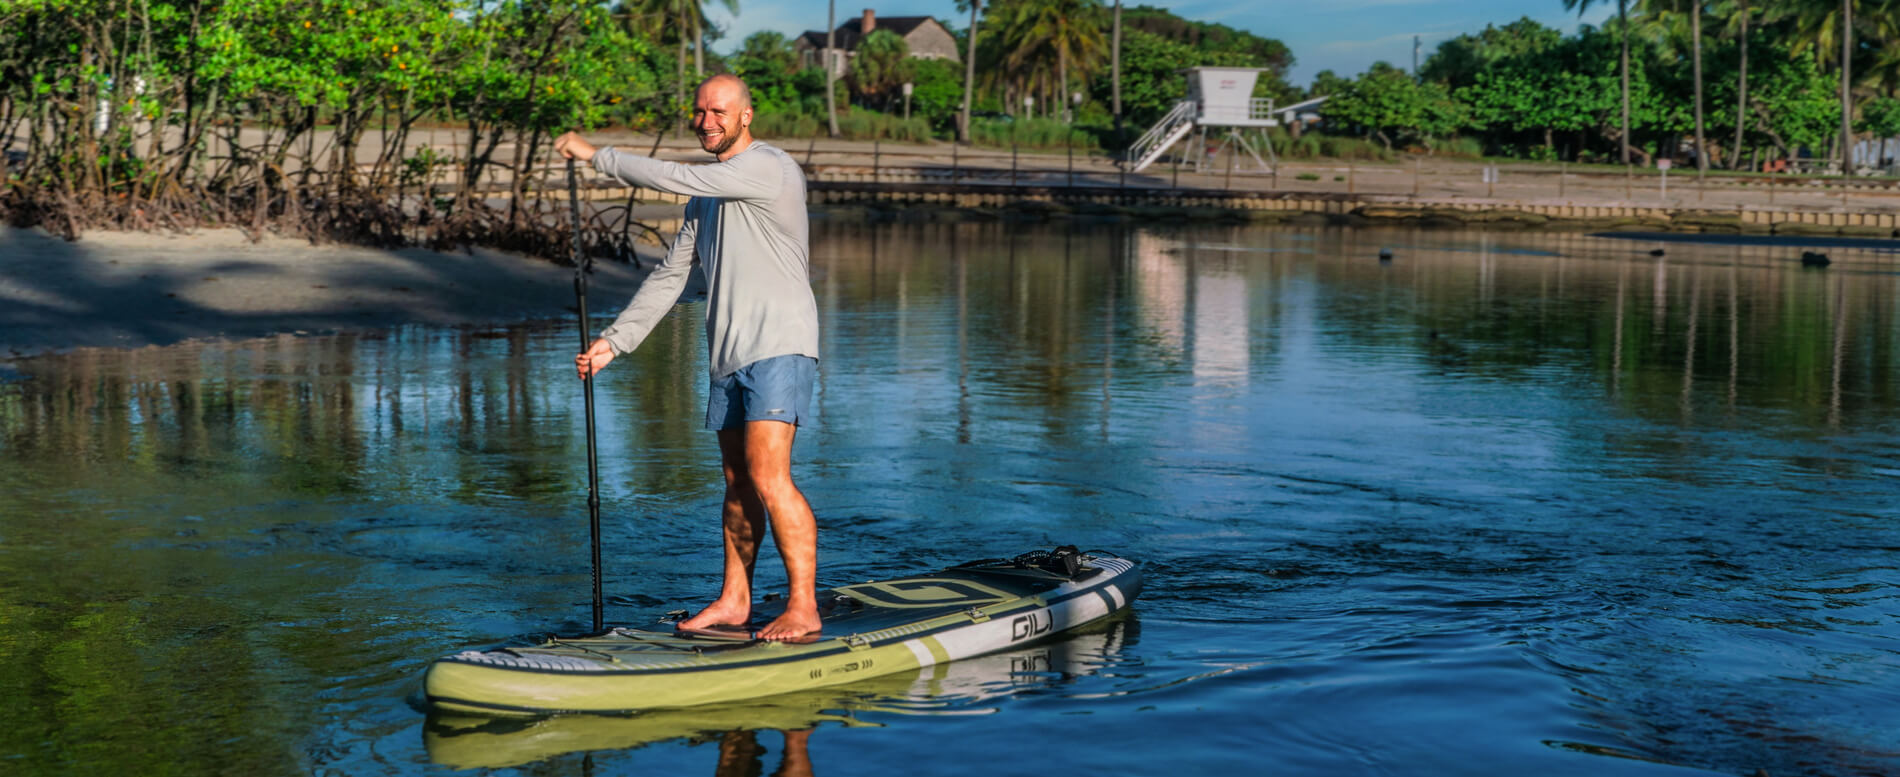 paz función laberinto How to Paddle Board | Beginner's Guide to SUP | GILI Sports